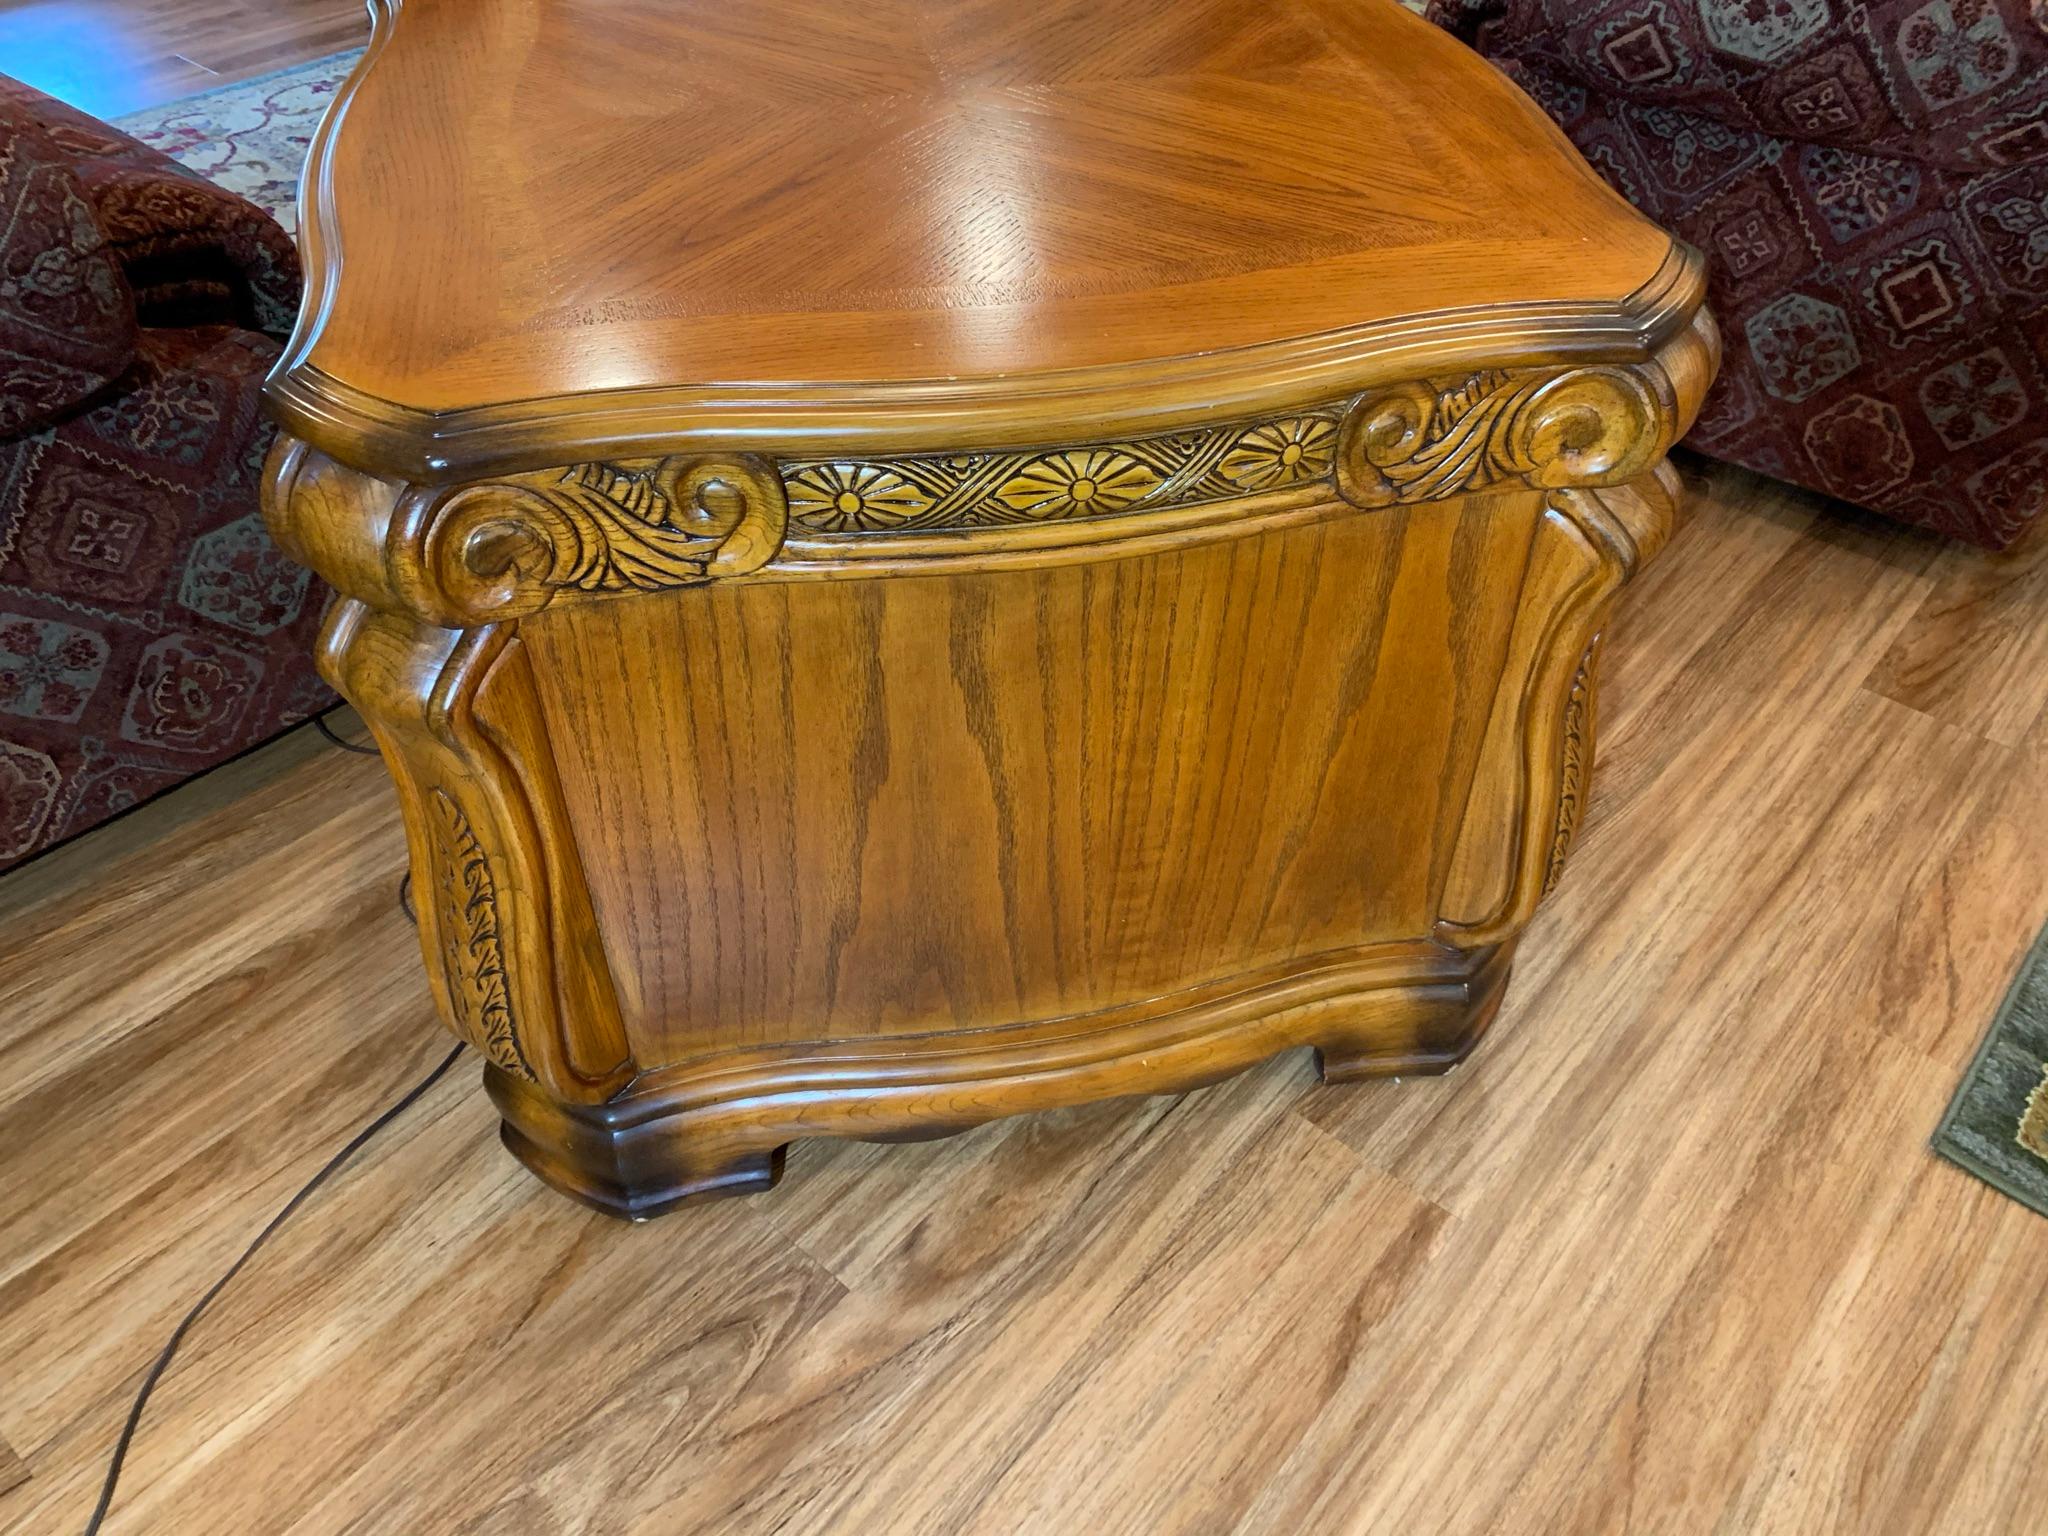 Gorgeous Aico Royal Oak End Tables and Coffee Table.  See Photos